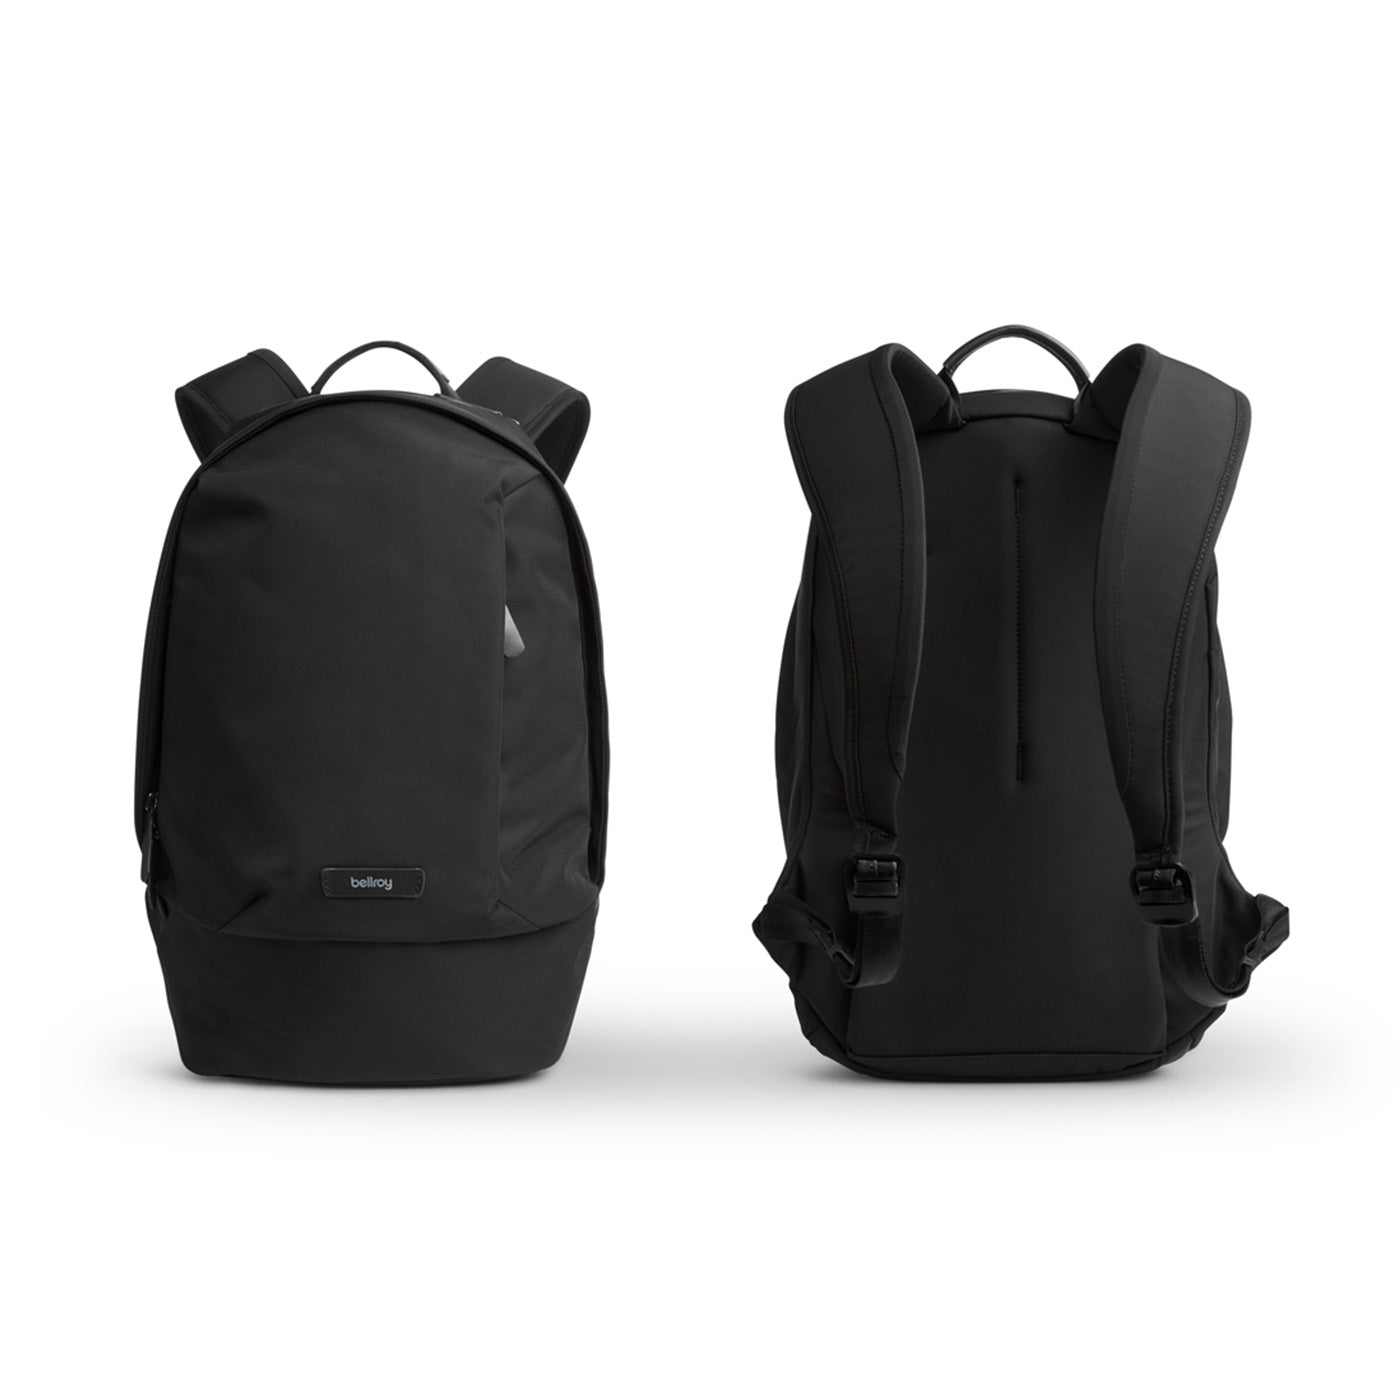 Bellroy Classic Backpack Compact 16L, Black